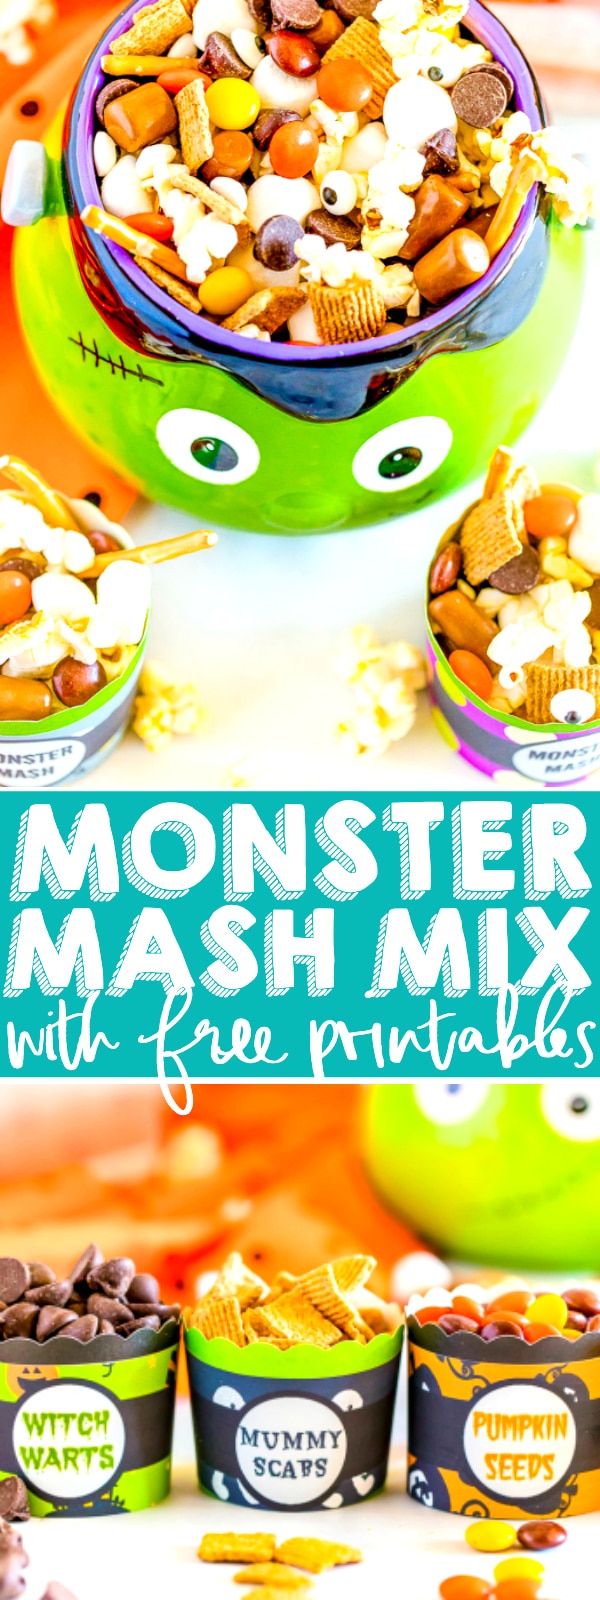 MONSTER MASH HALLOWEEN TRAIL MIX - An easy and adorable Halloween Trail Mix that makes the perfect addition to your Halloween treat table, one that allows your little monsters to pick and choose their favorite holiday snacks! Plus, this Halloween recipe comes with free printables for your Monster Mash Halloween Trail Mix display!!  | The Love Nerds #HALLOWEENDESSERT #HALLOWEENPARTY #PARTYMIX #FREEHALLOWEENPRINTABLE